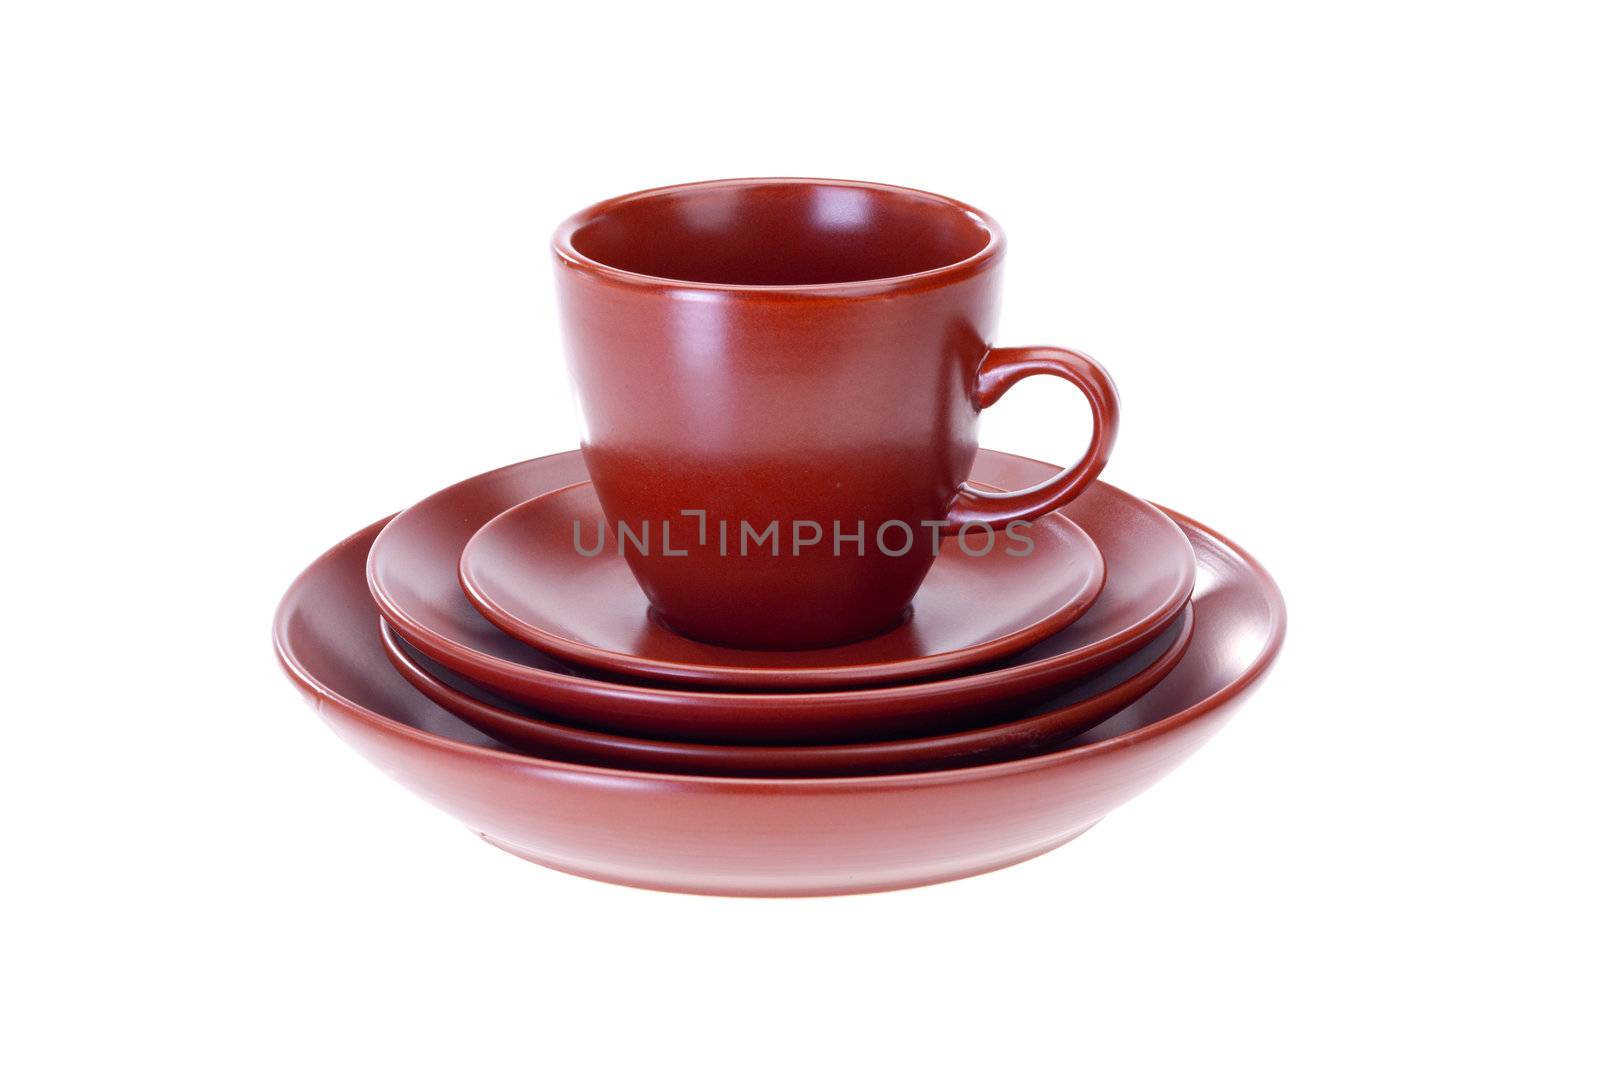 set of tableware over white background, cup and plates